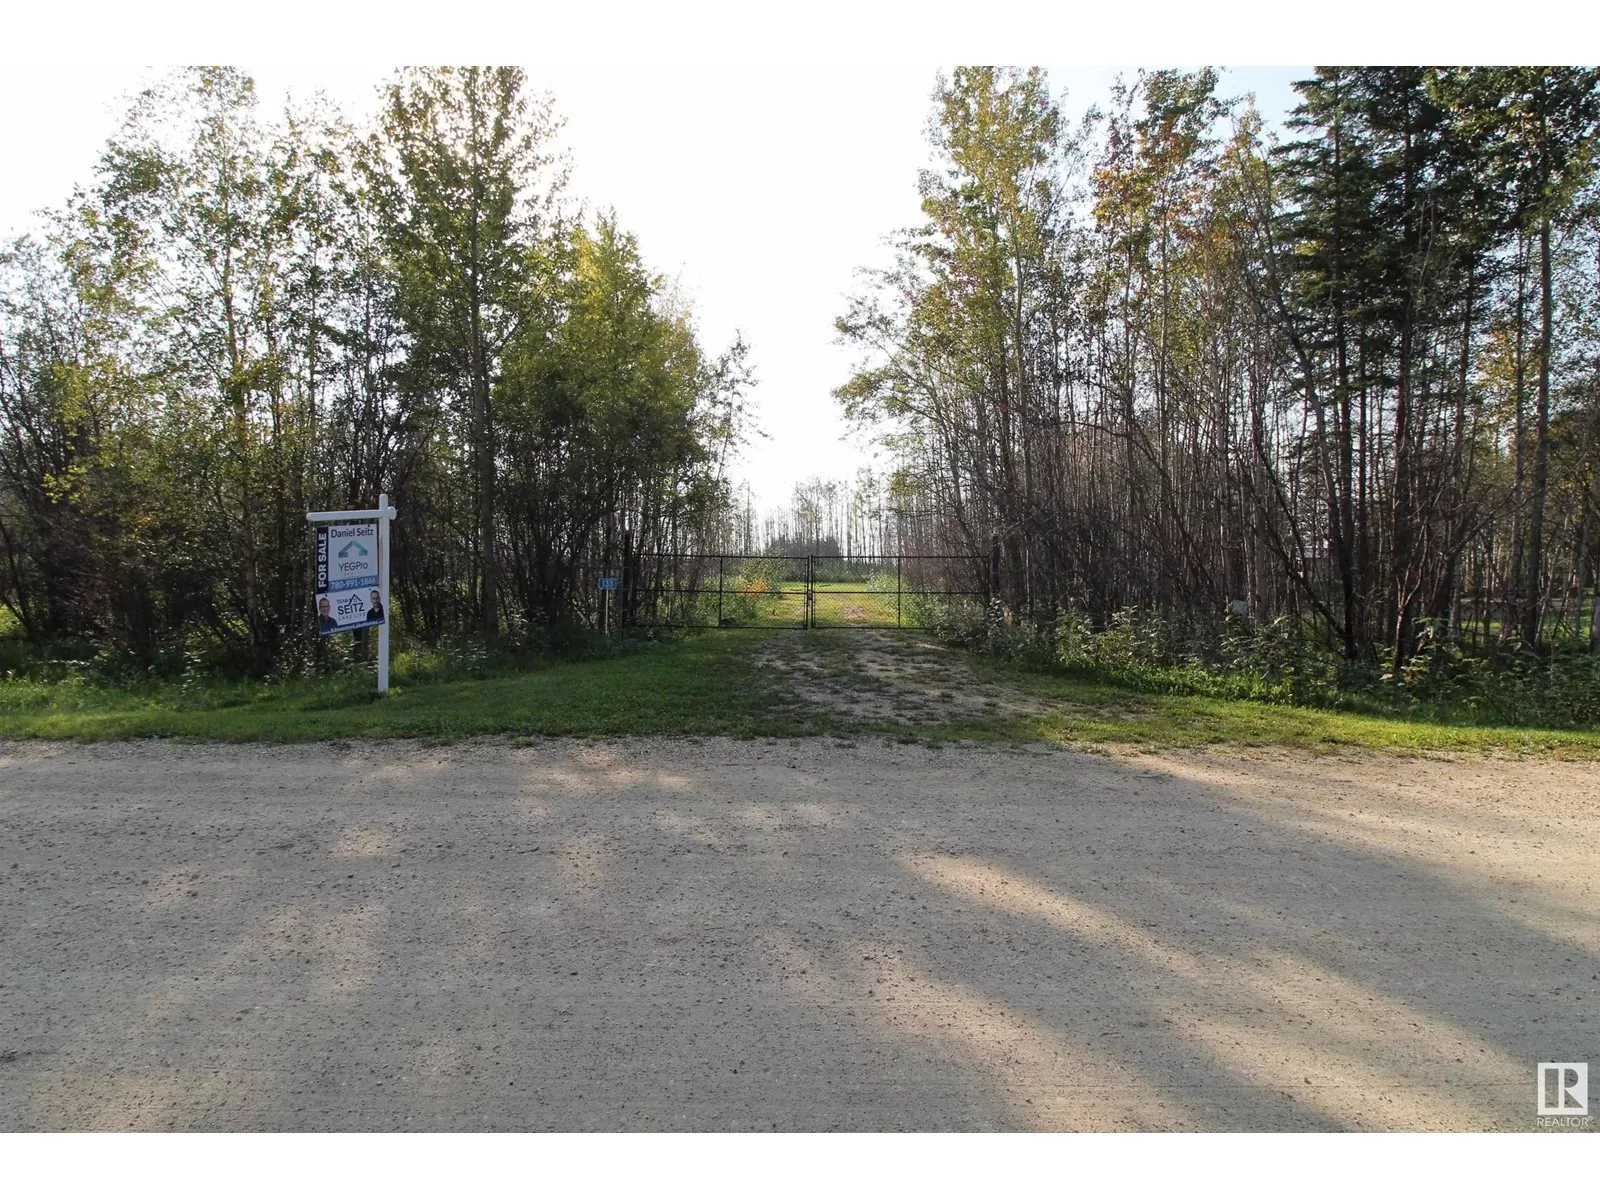 No Building for rent: 133 5124 Twp Rd 554, Rural Lac Ste. Anne County, Alberta T0E 0L0